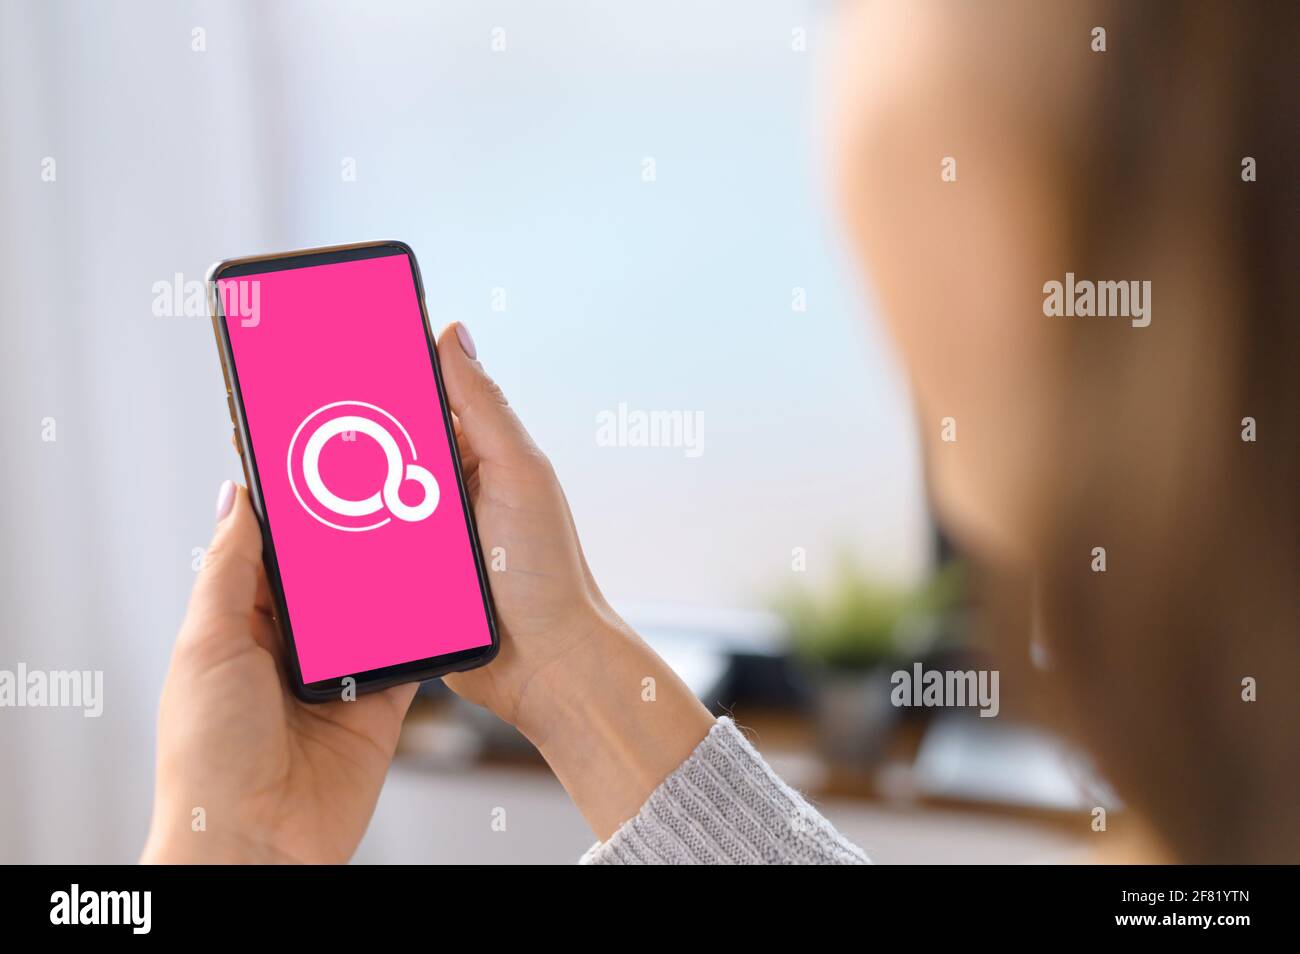 Kyiv, Ukraine - April 2, 2021: Google Fuchsia OS logo on the mobile phone screen. A woman is holding smartphone with Fuchsia logo on the display, operating system developed by Google Corporation Stock Photo